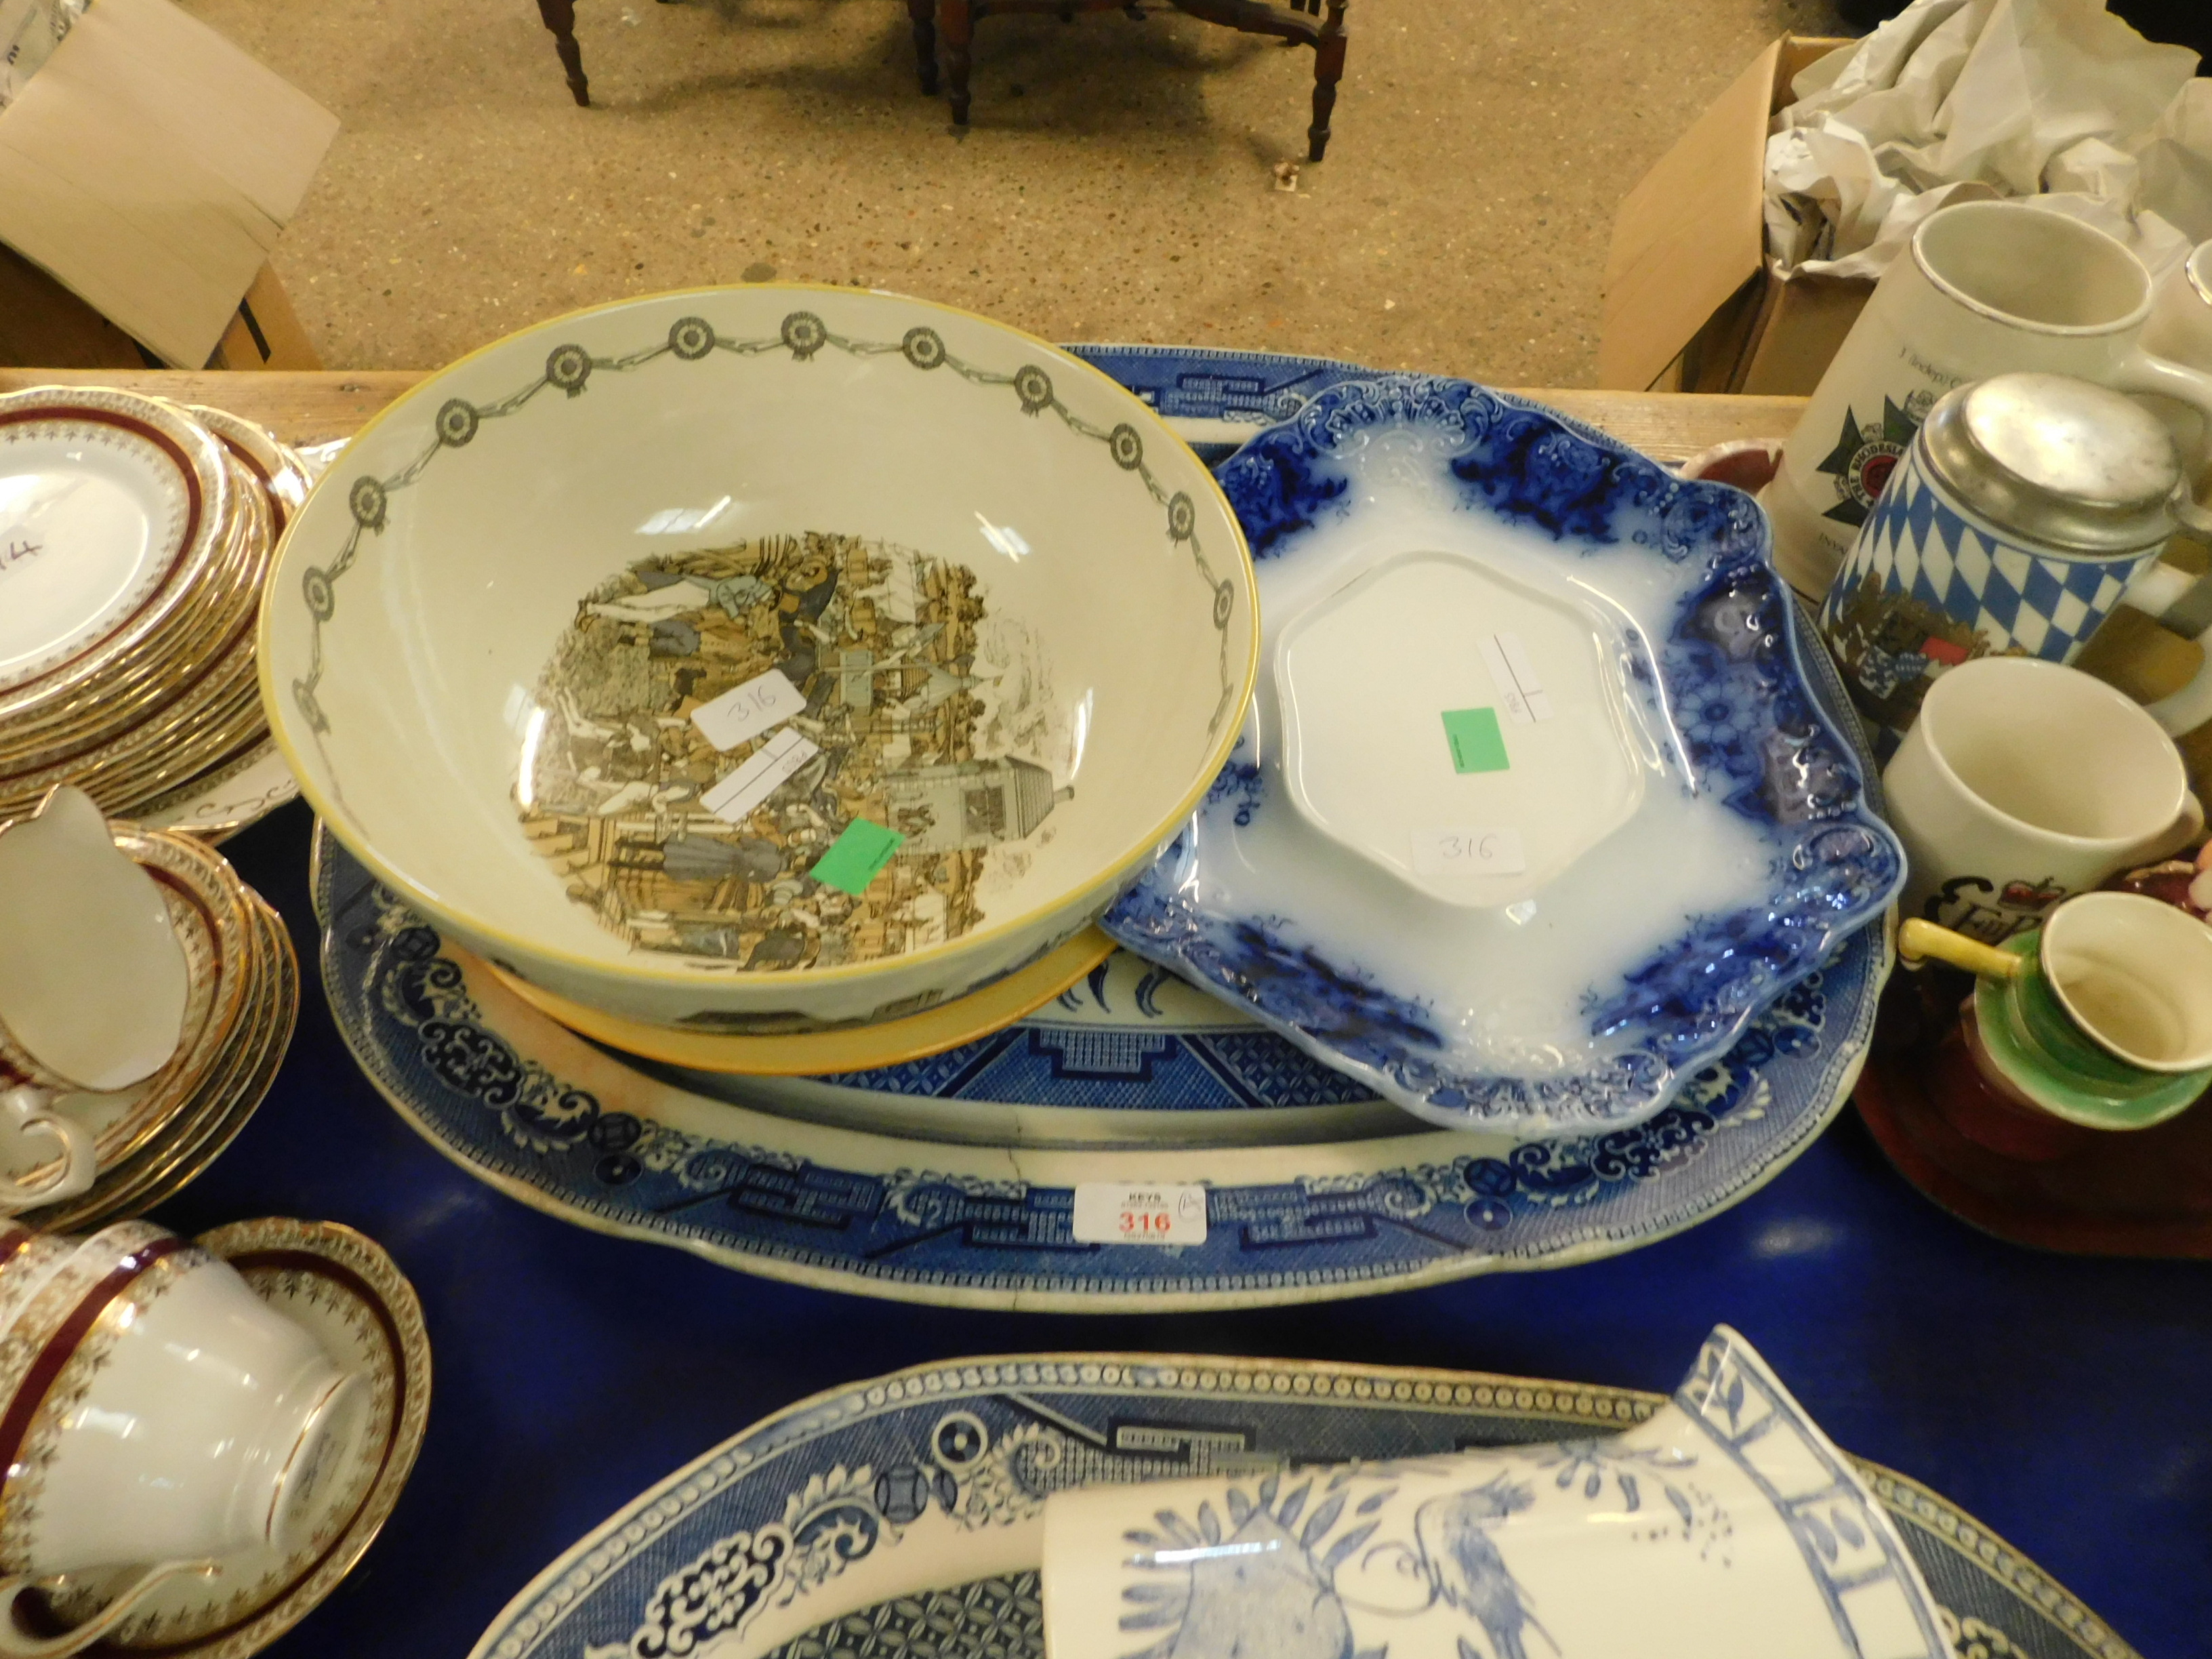 SHAND-KYDD POTTERY NEWMARKET BOWL, LARGE BLUE AND WHITE MEAT PLATE, CLARICE CLIFF TYPE DISH ETC